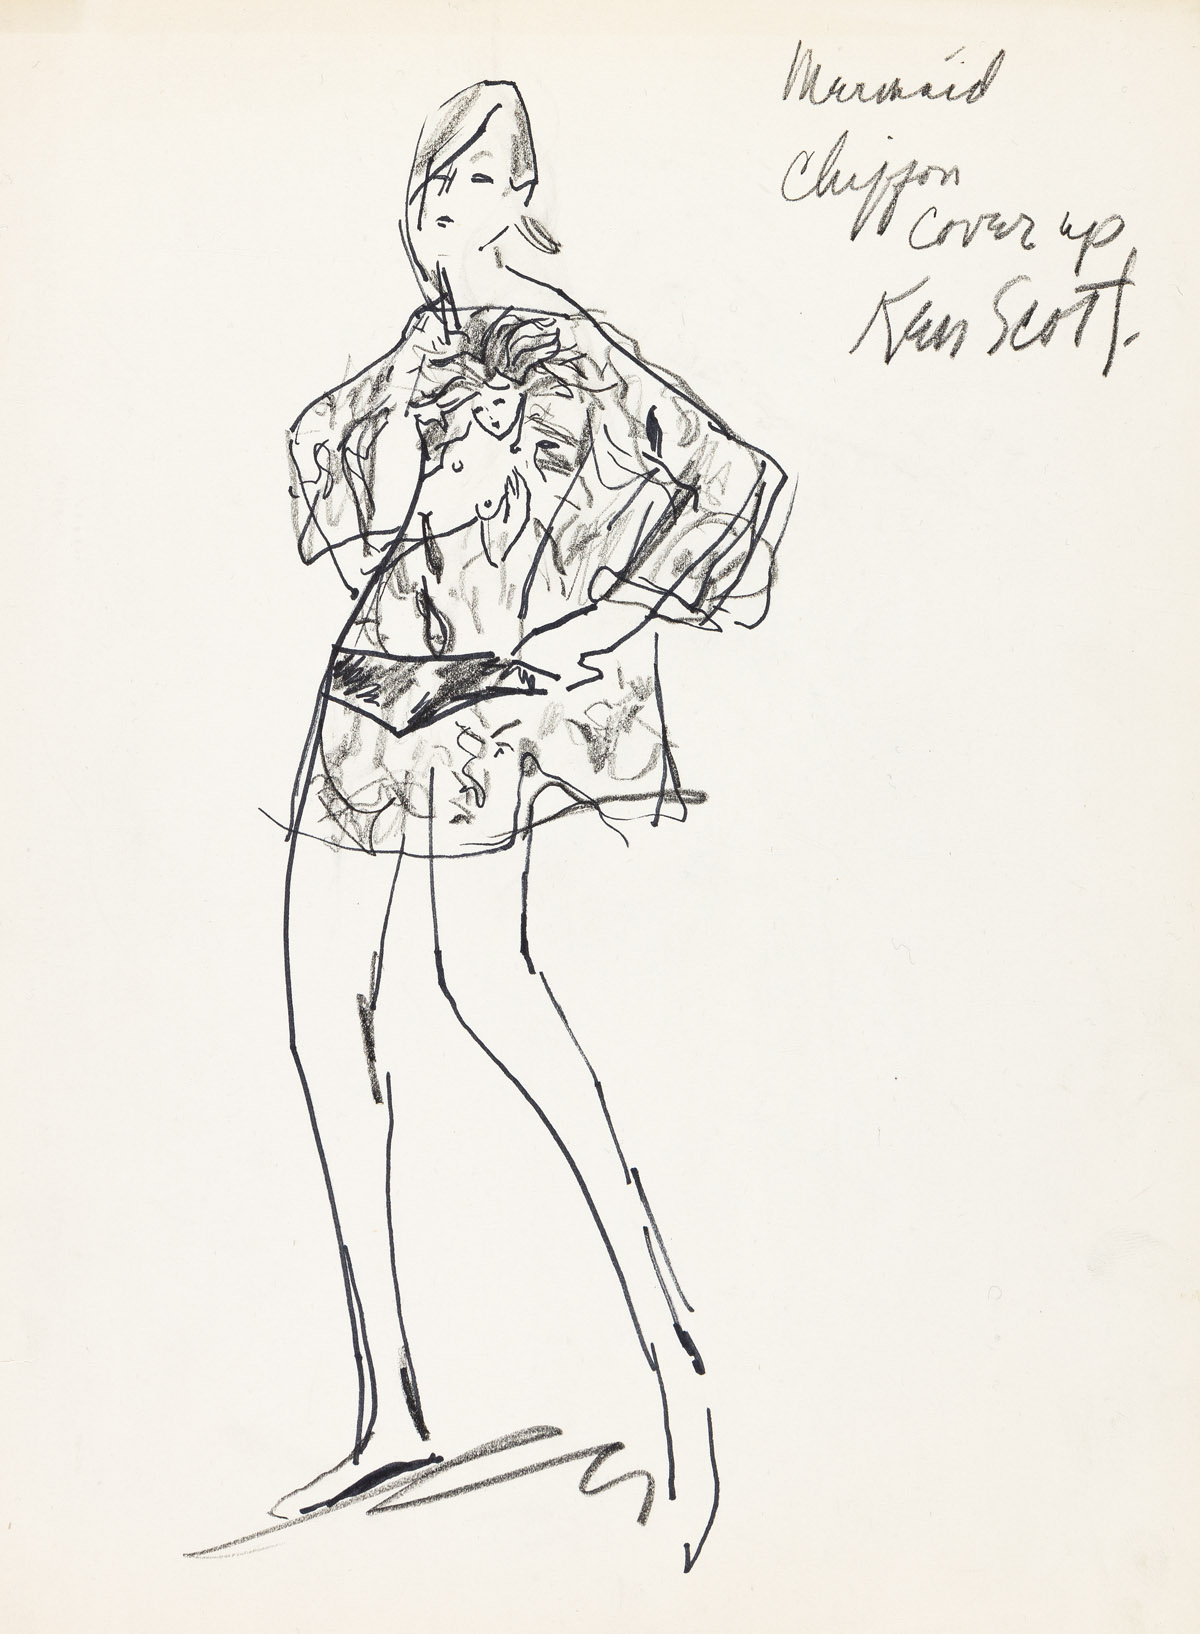 JOE EULA (1925-2004) Archive of over 100 sketchbook fashion drawings for mainly Italian designers. [GAY ARTIST]